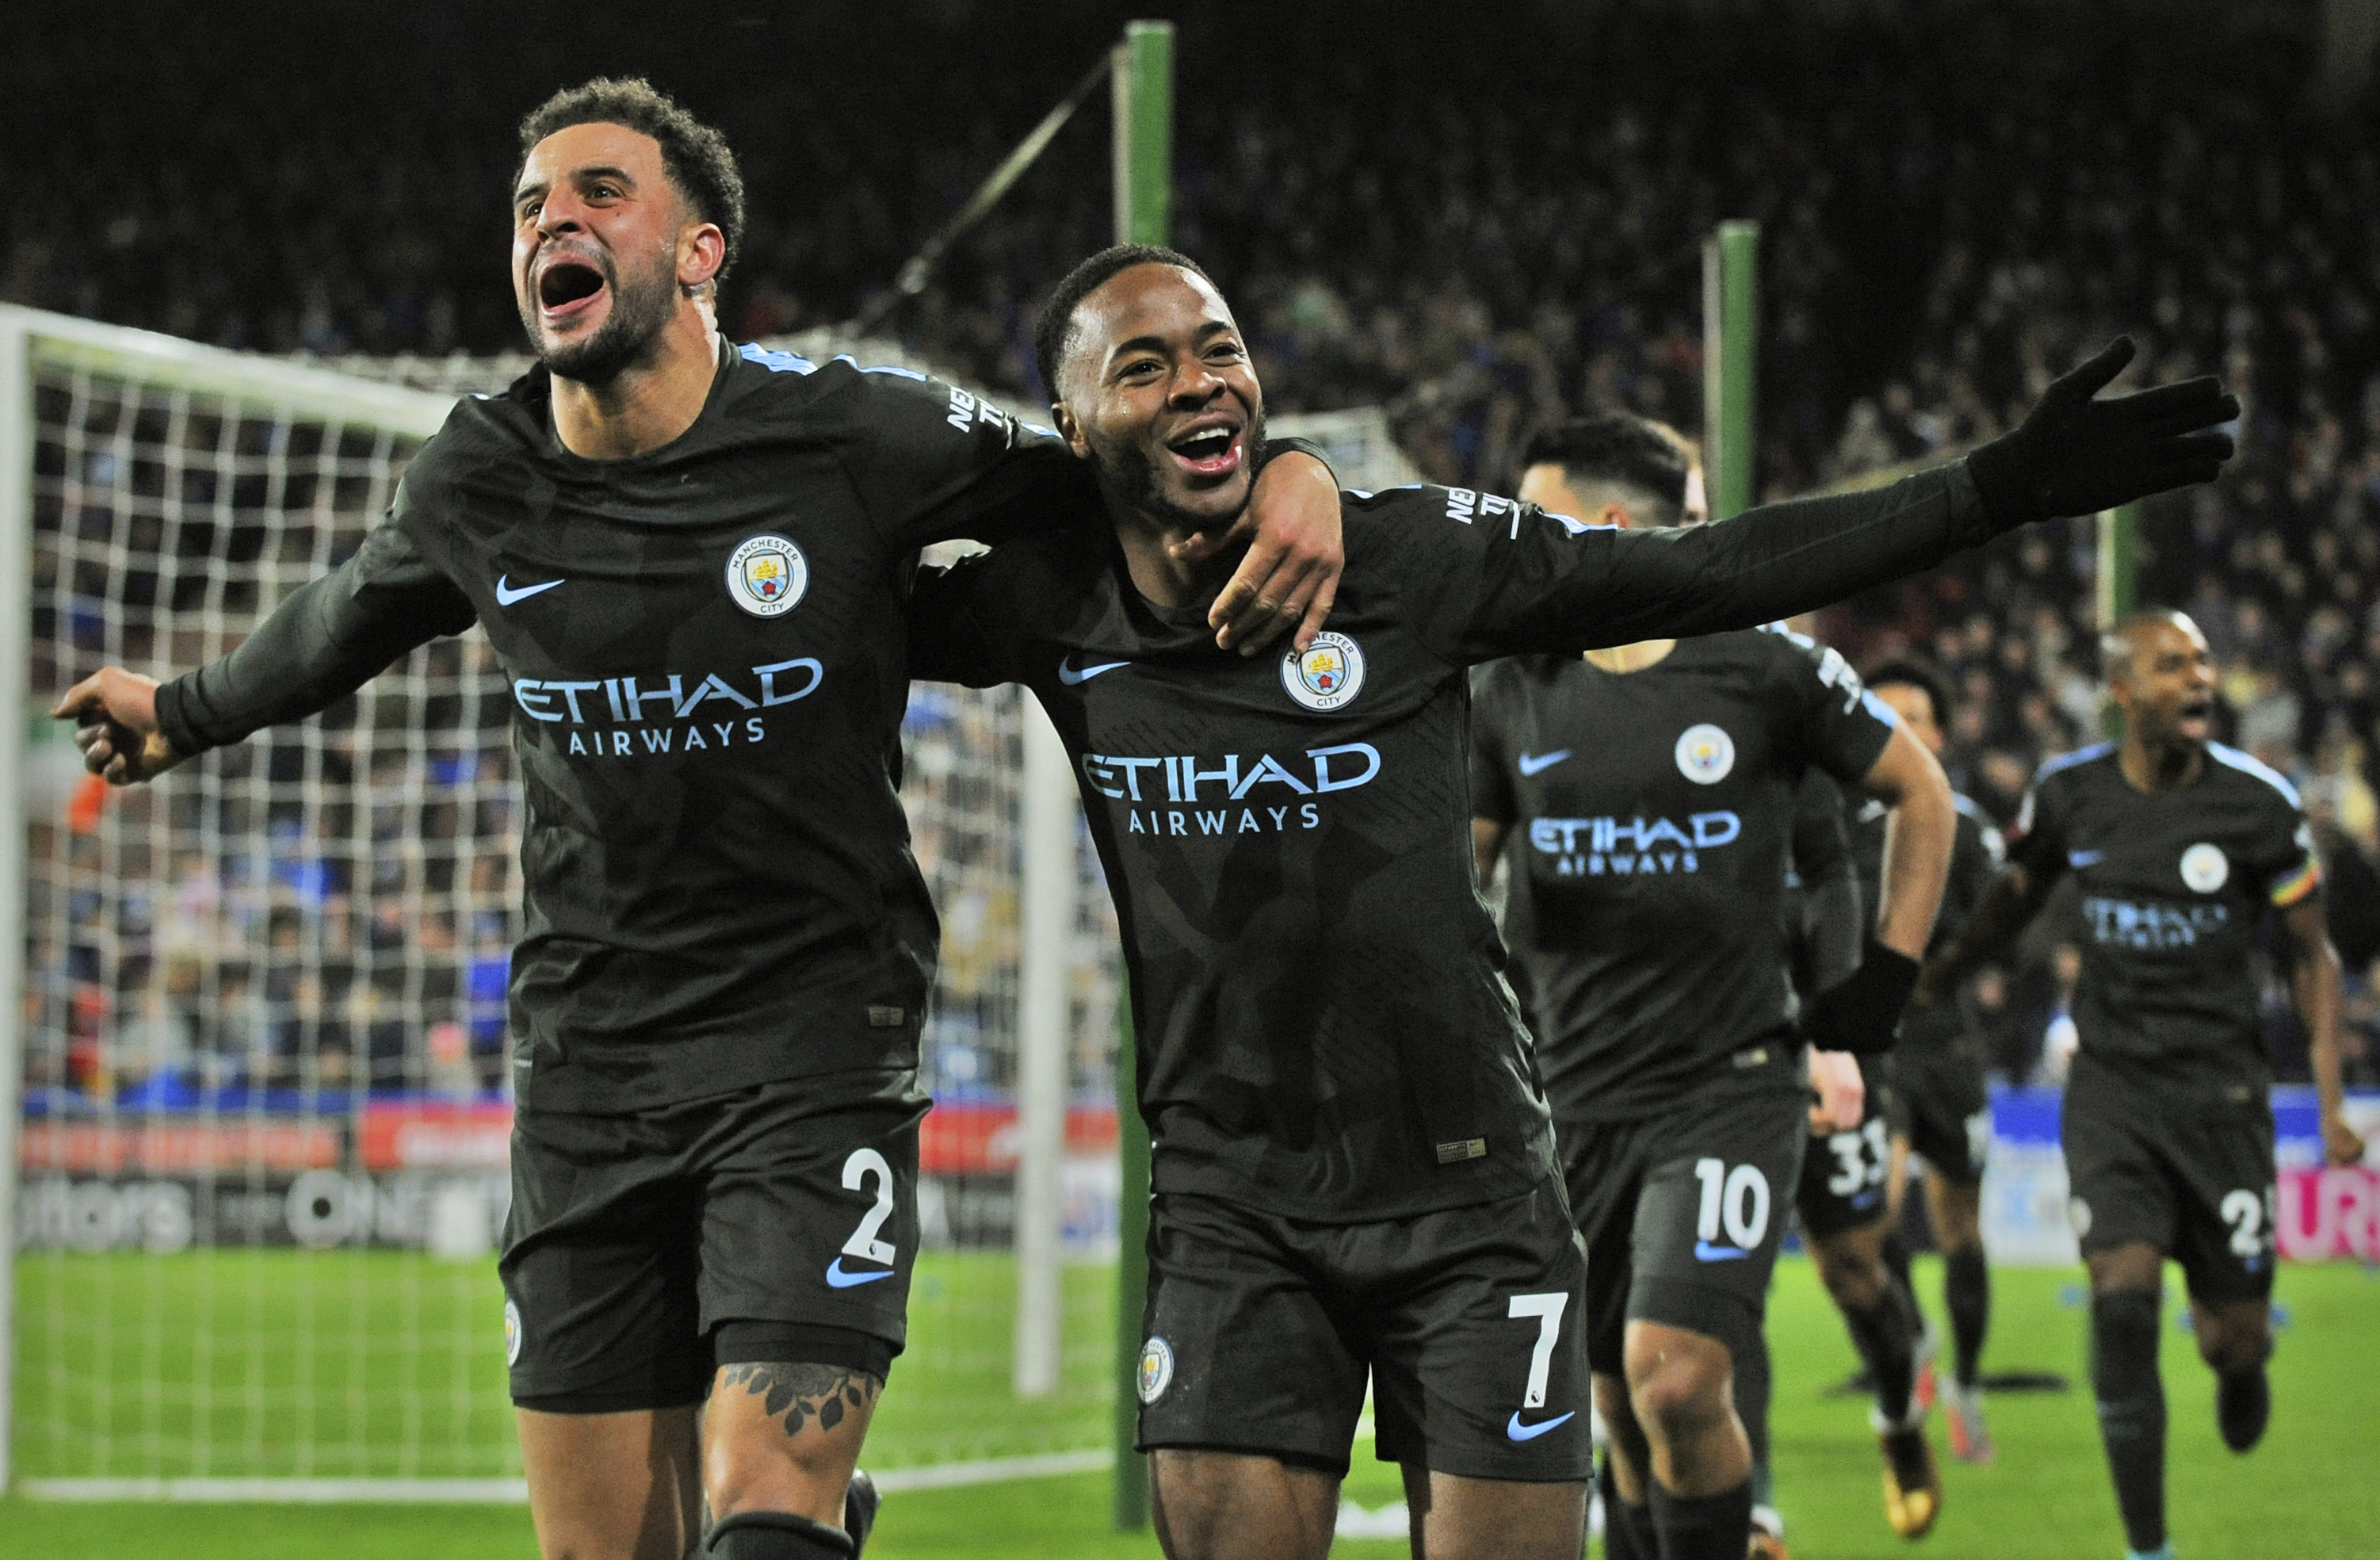 Manchester City's Raheem Sterling, right, celebrated with teammate Kyle Walker after scoring during the English Premier League soccer match between Huddersfield Town and Manchester City in Huddersfield, England, on Sunday. Man City equaled a club record with its 11th consecutive league victory.